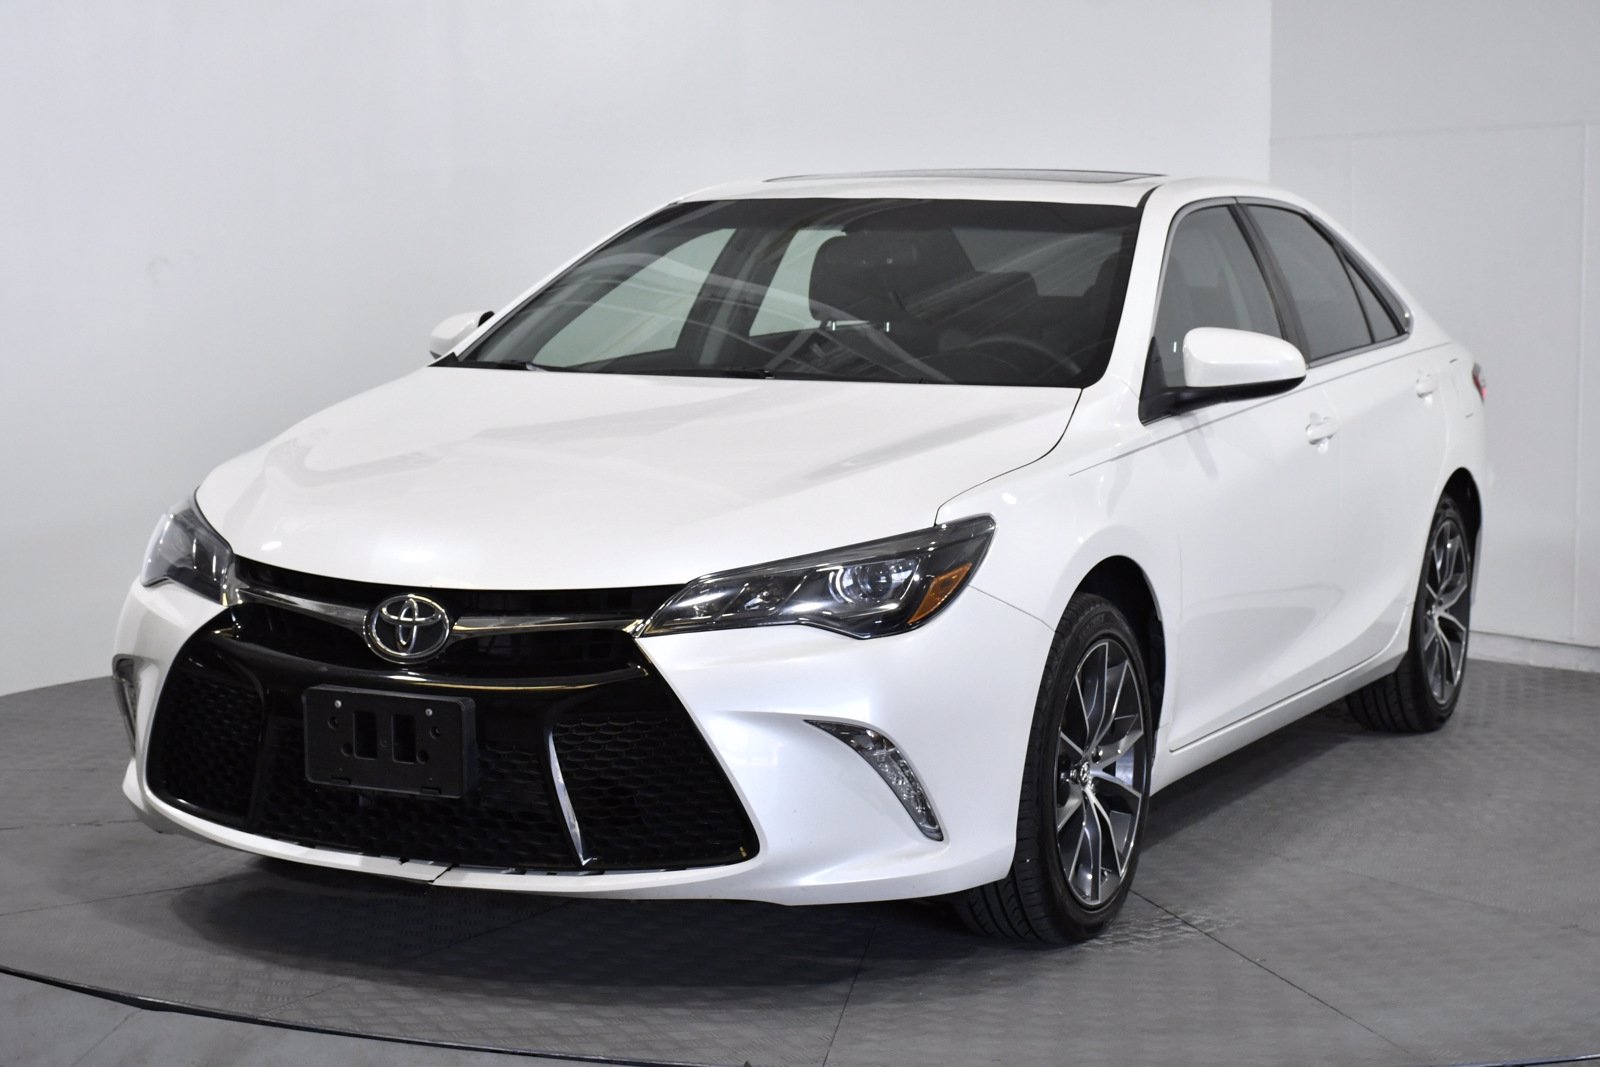 Pre-Owned 2017 Toyota Camry XSE V6 4dr Car in Palmetto Bay #J5121661A